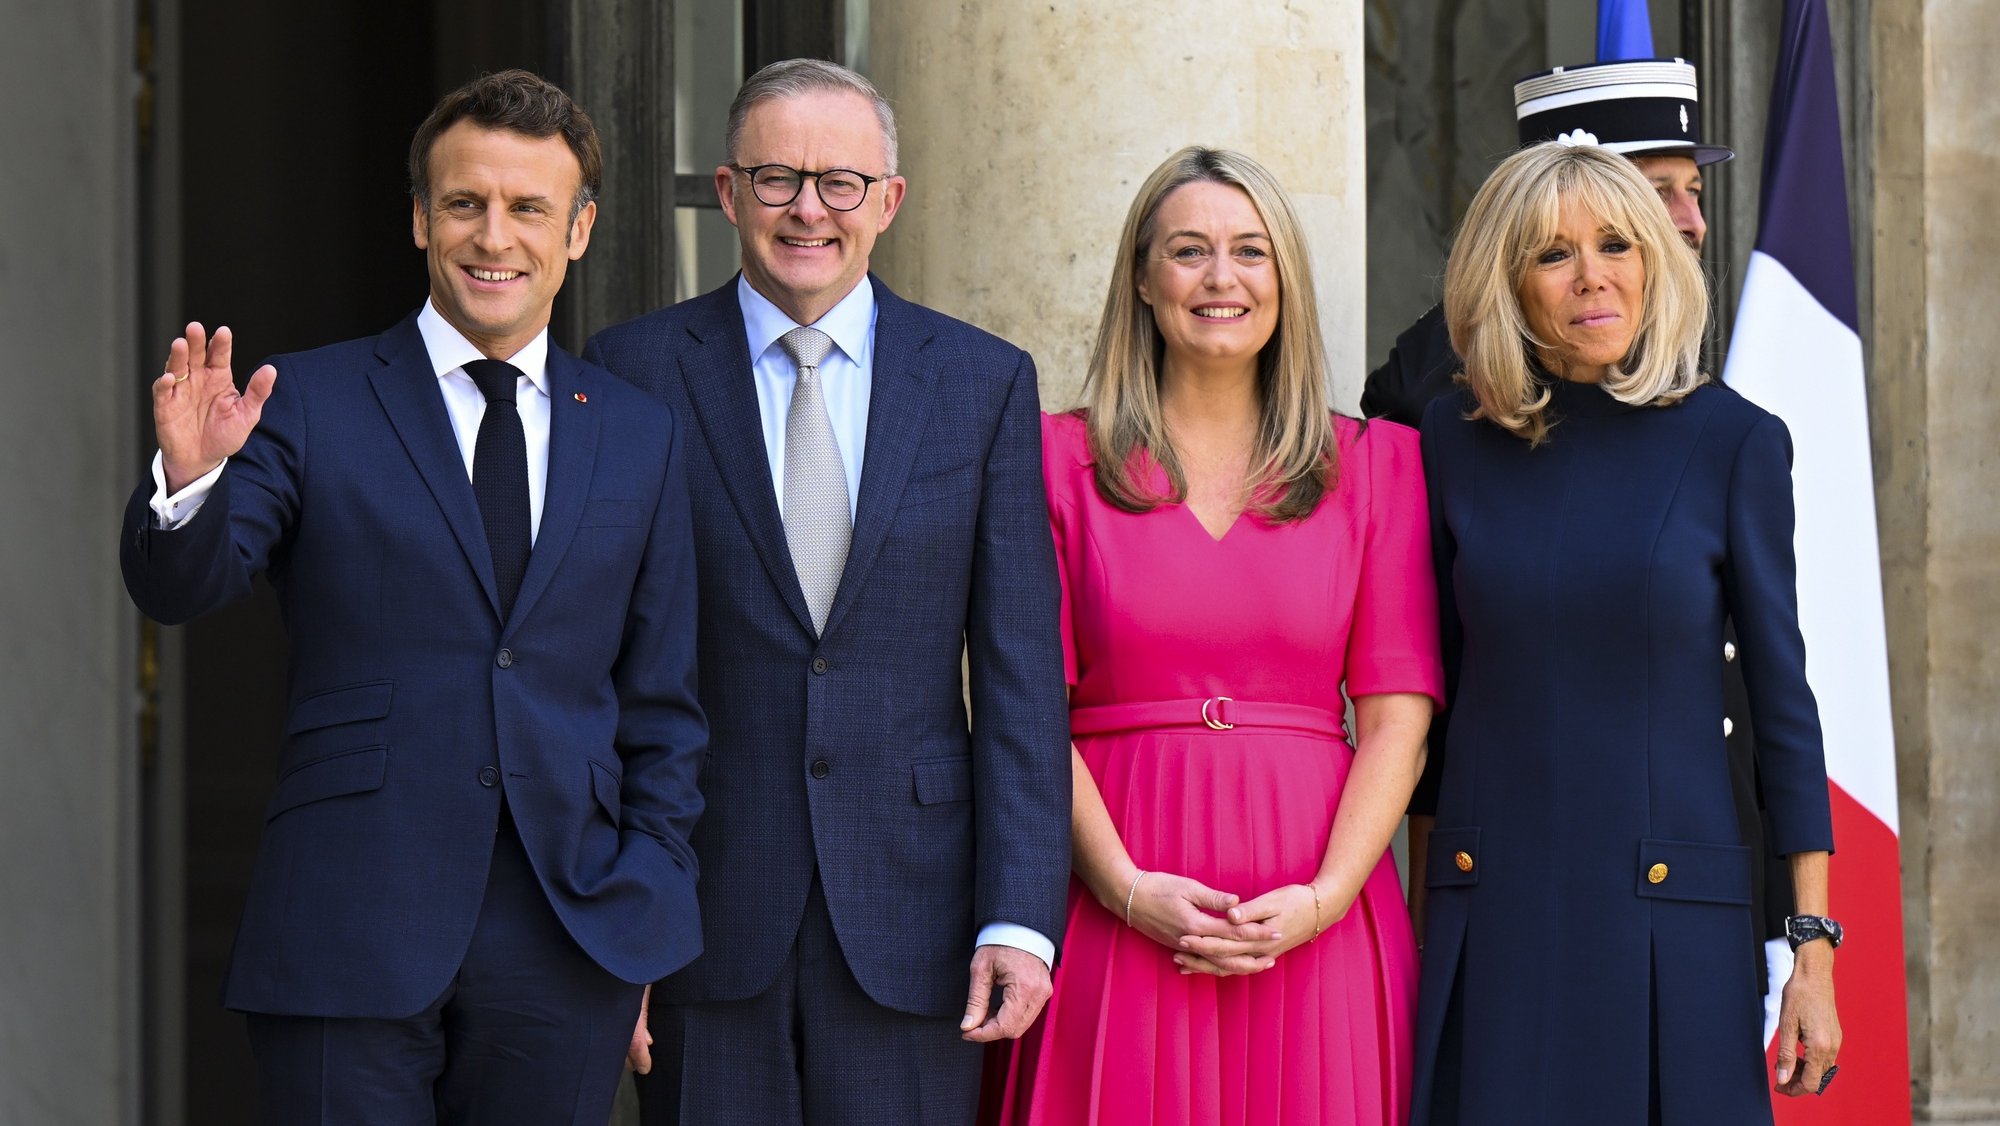 epa10045799 Australian Prime Minister Anthony Albanese is greeted by French President Emmanuel Macron along with their partners Jodie Haydon (2nd from right) and Brigitte Macron (right) at Elysee Palace in Paris, France, 01 July 2022. Mr Albanese is in France on a two-day official visit in a bid to repair the relationship with French President Emmanuel Macron.  EPA/LUKAS COCH AUSTRALIA AND NEW ZEALAND OUT